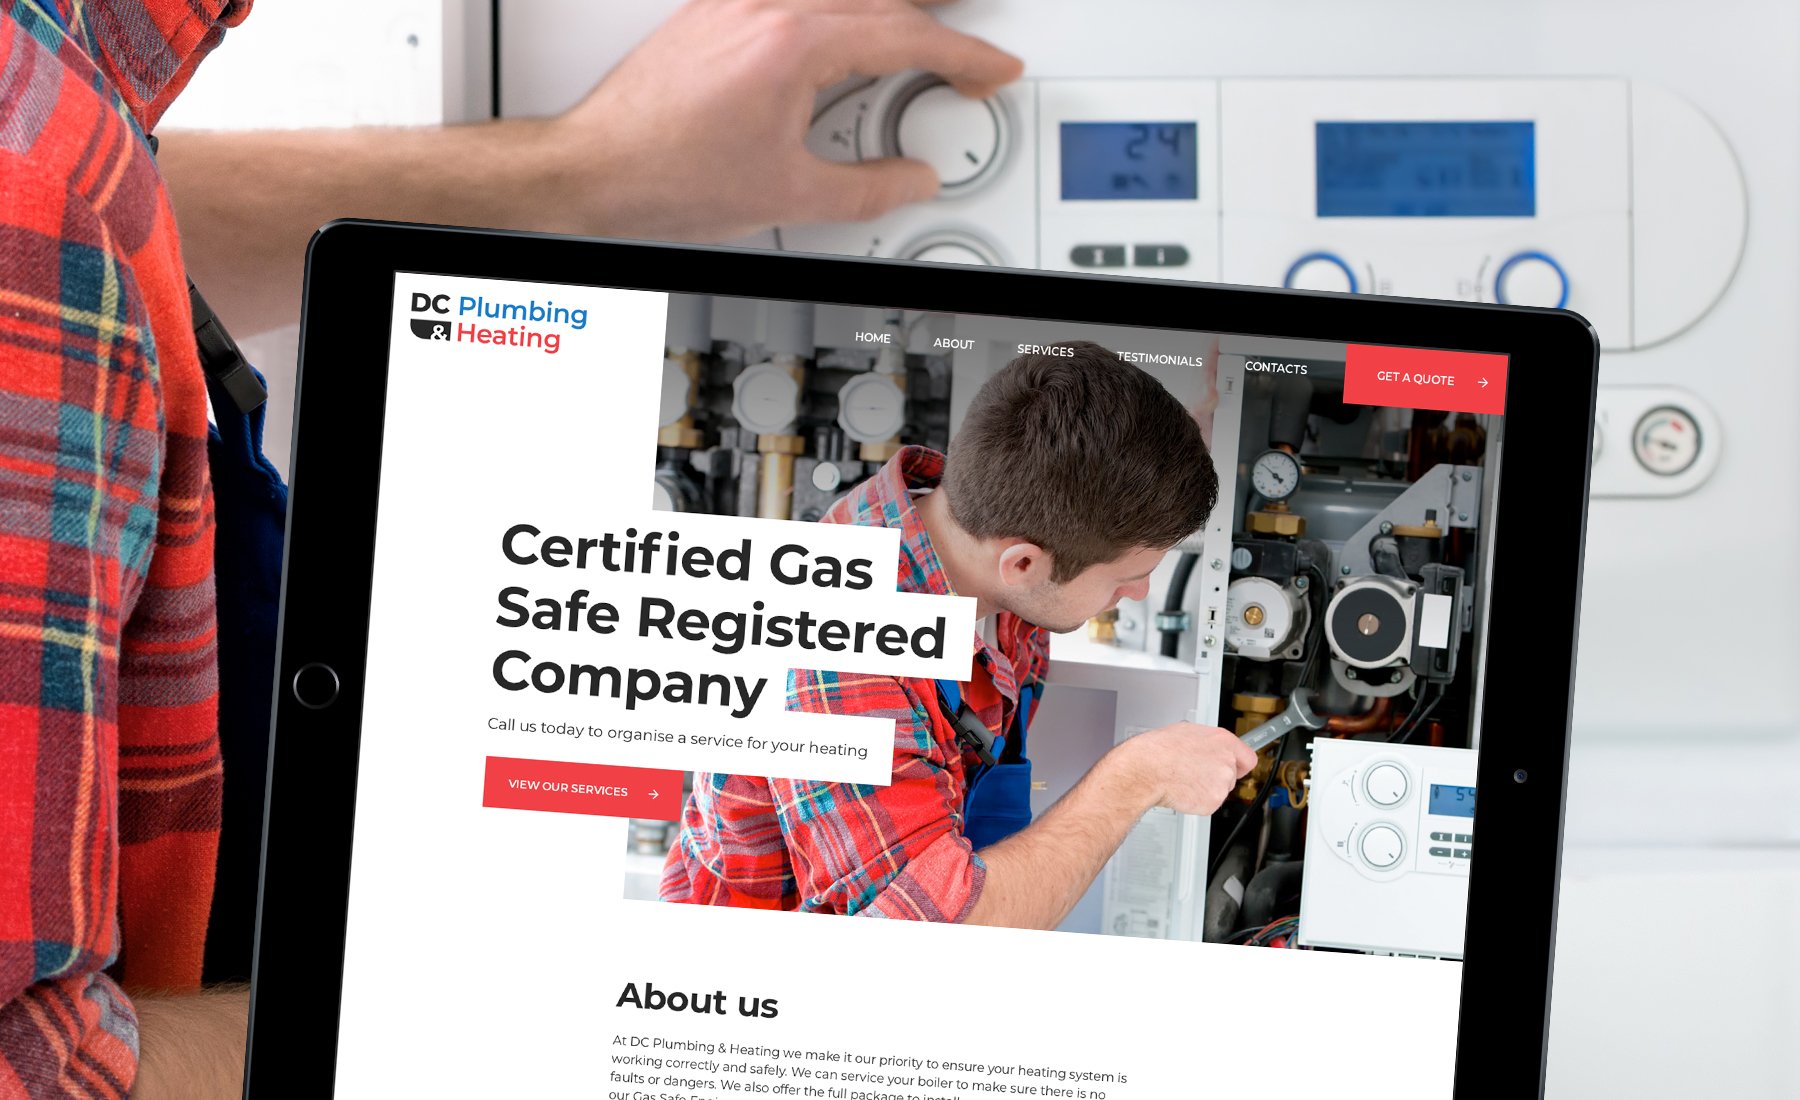 Plumbing and Heating One Page Website